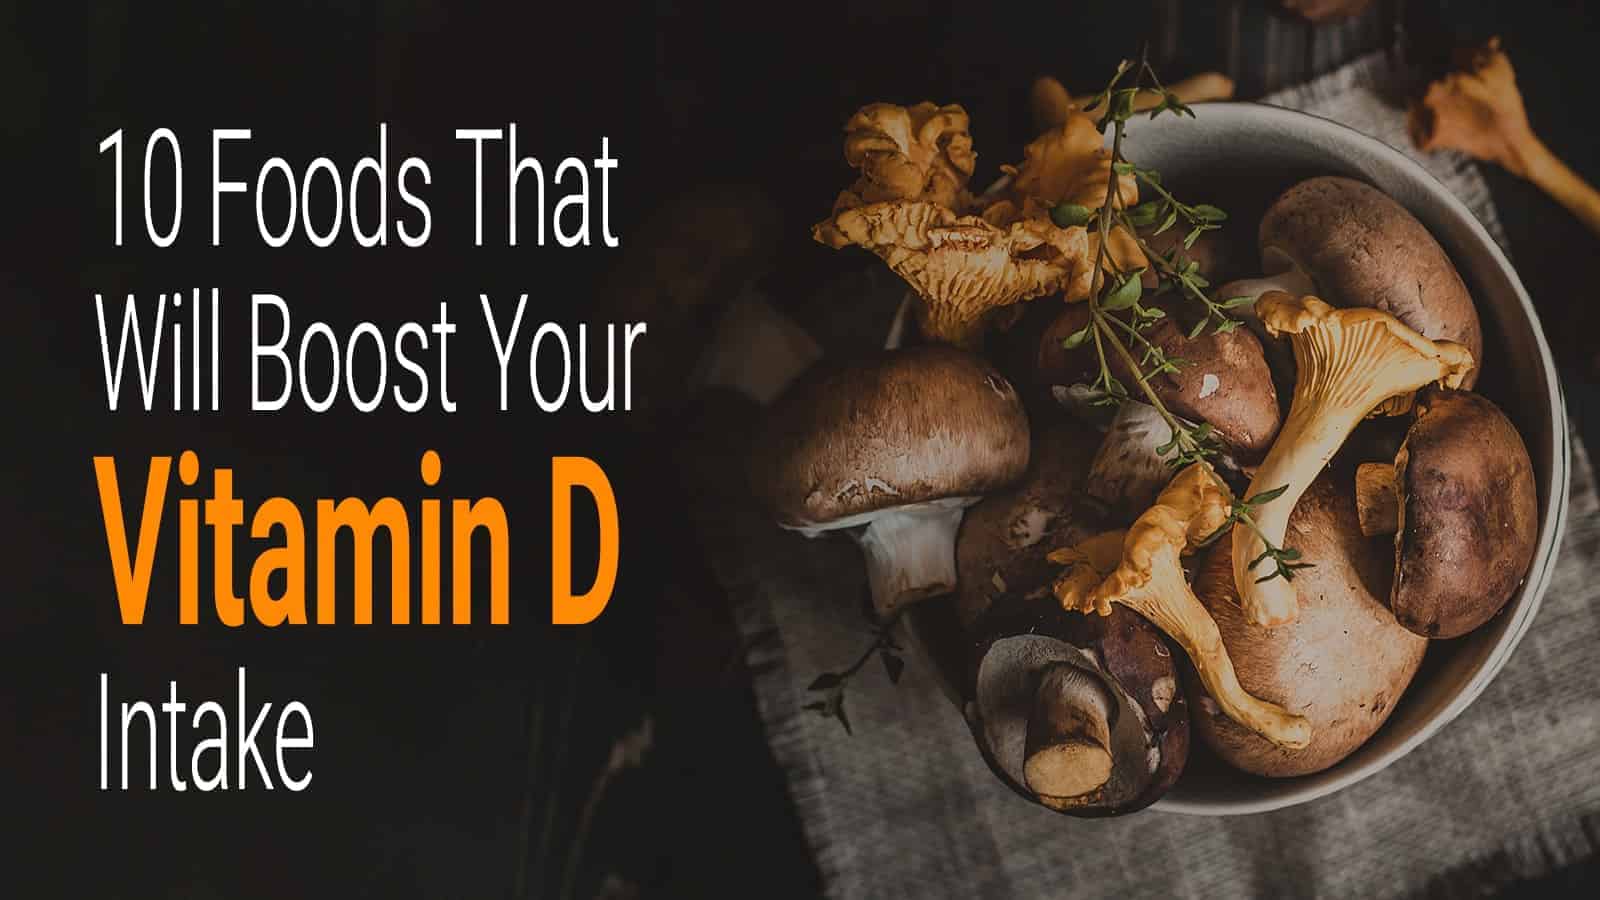 10 Foods That Will Boost Your Vitamin D Intake